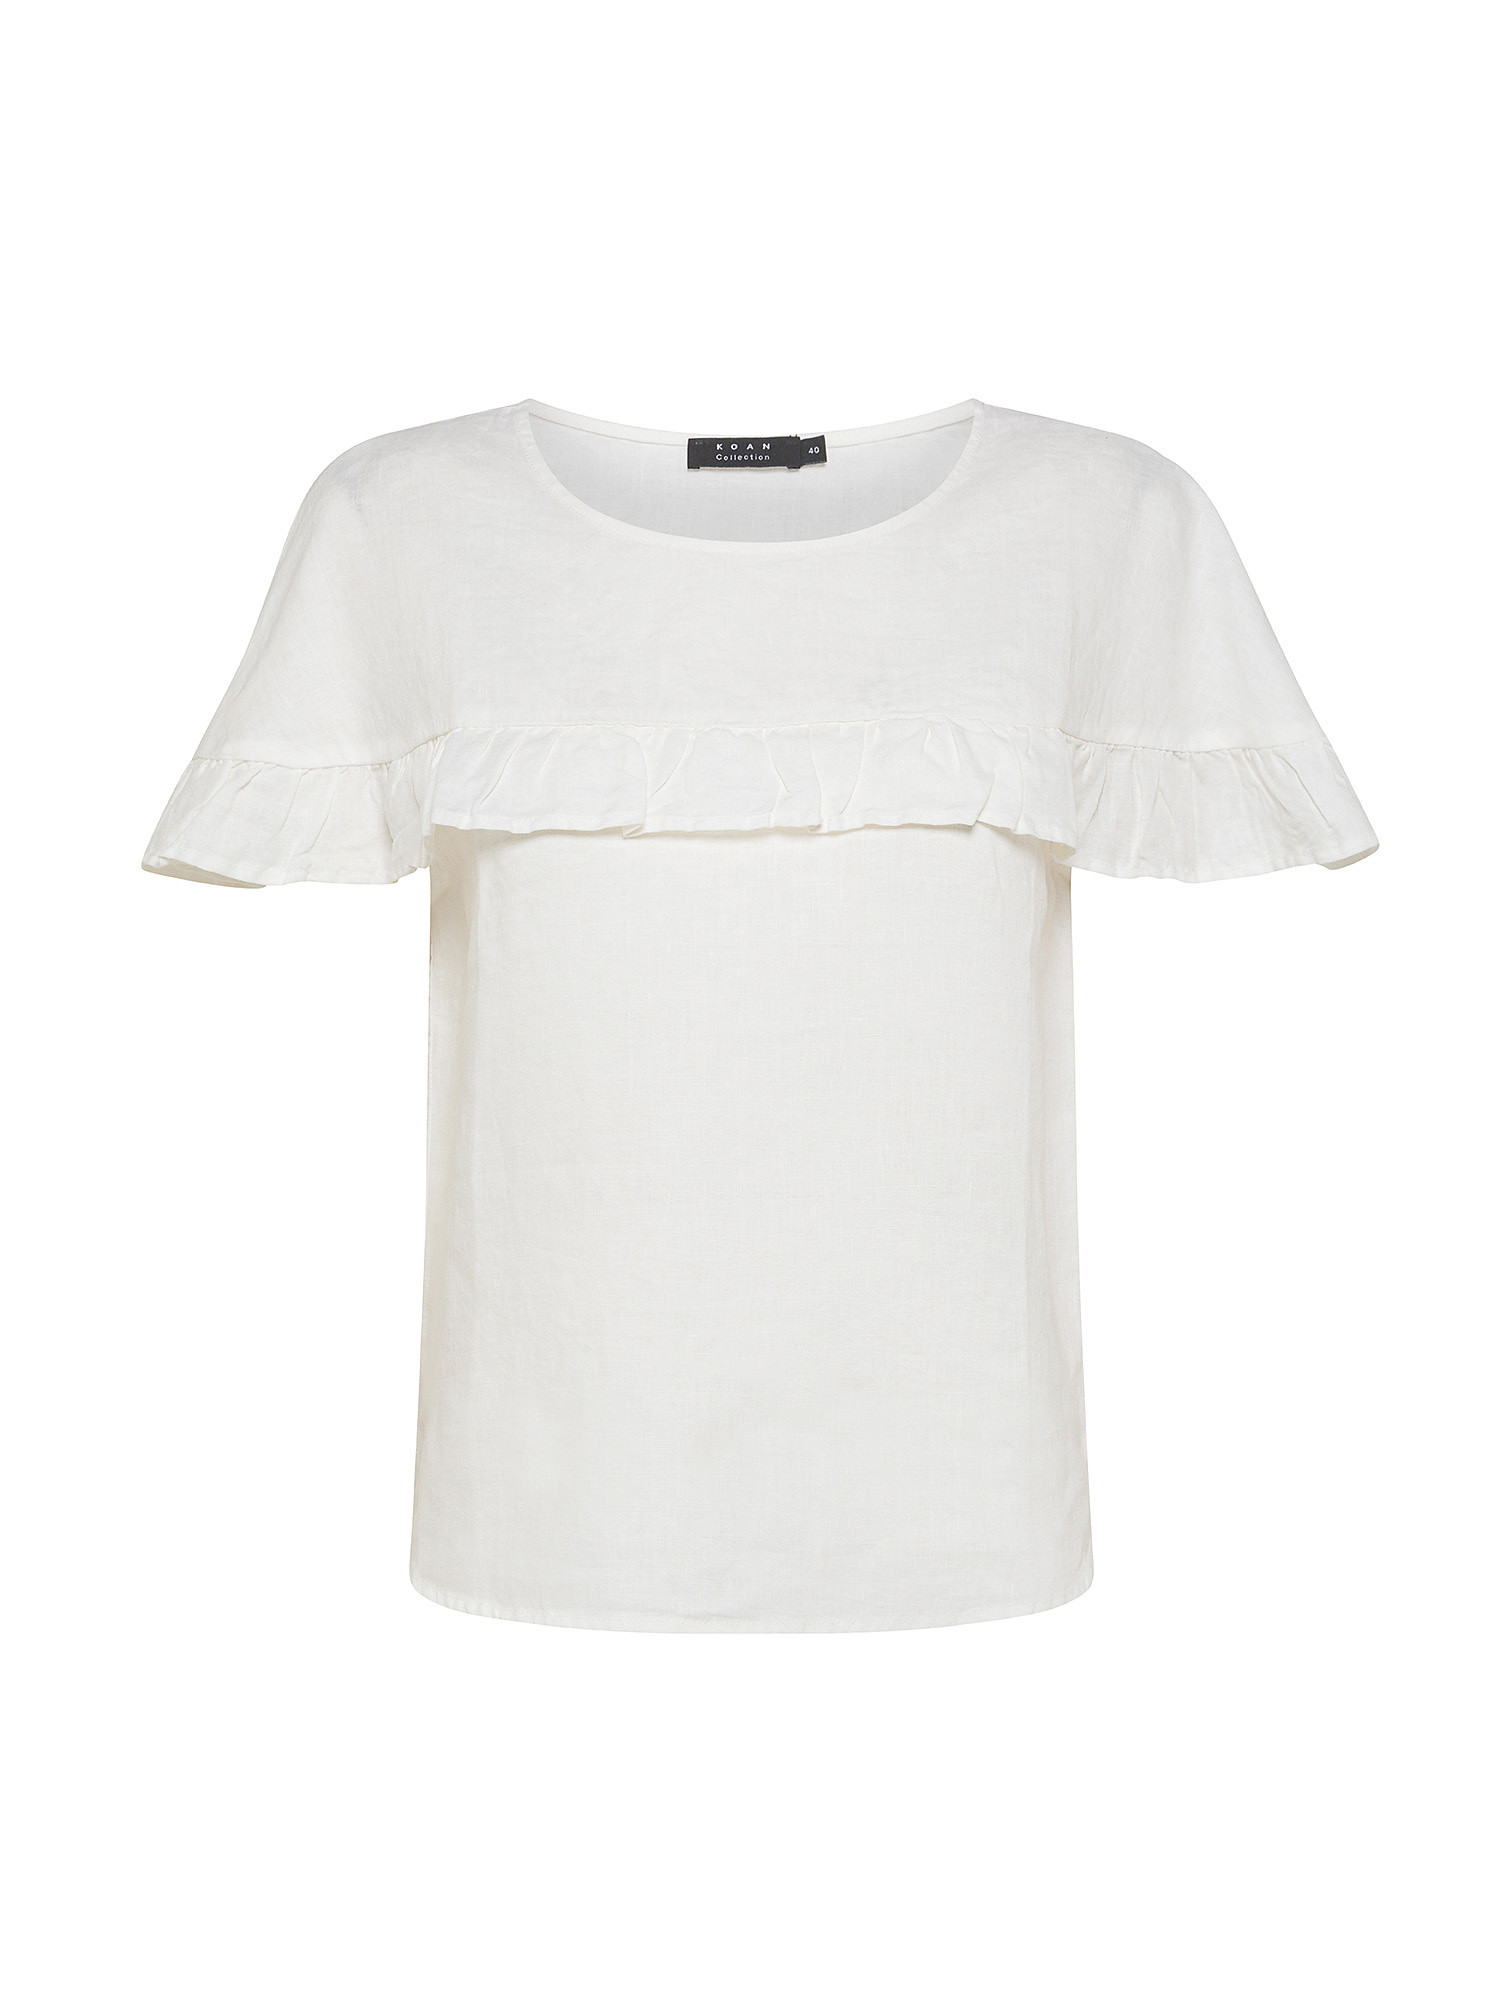 Koan - Linen blouse with ruffles, White, large image number 0